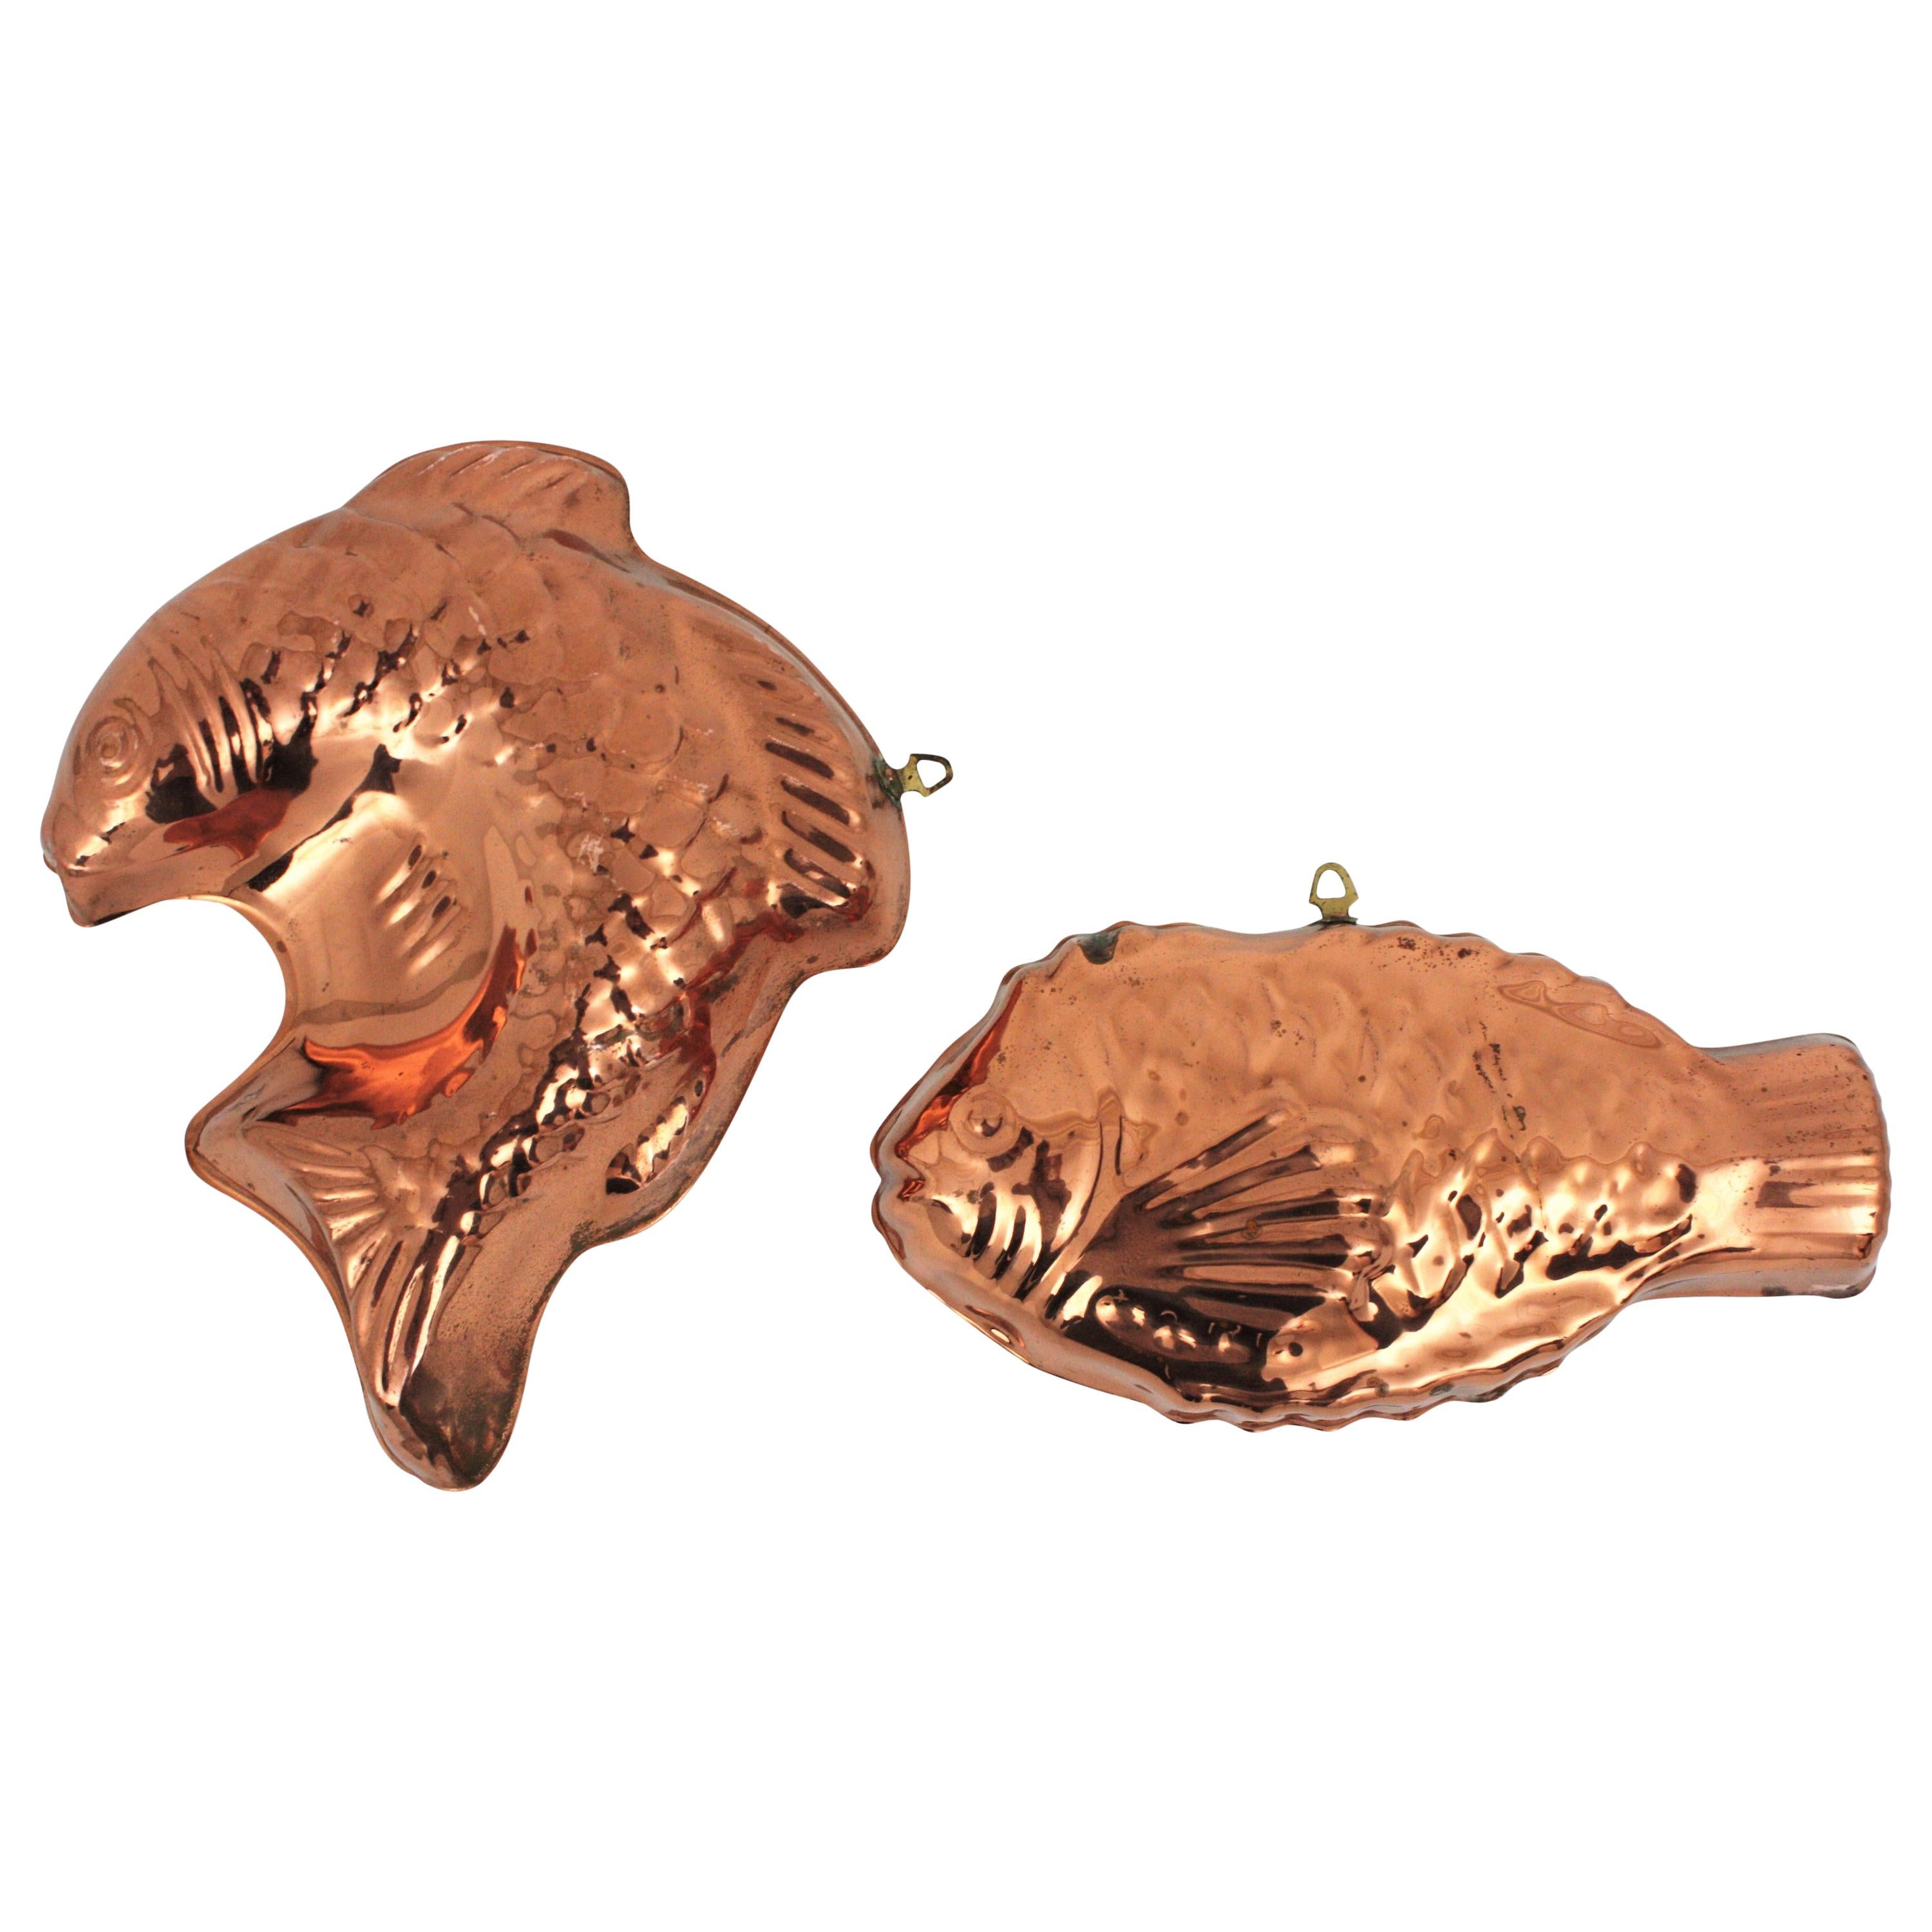 Unmatching Pair of Fish Copper Moulds from Portugal, 1920s